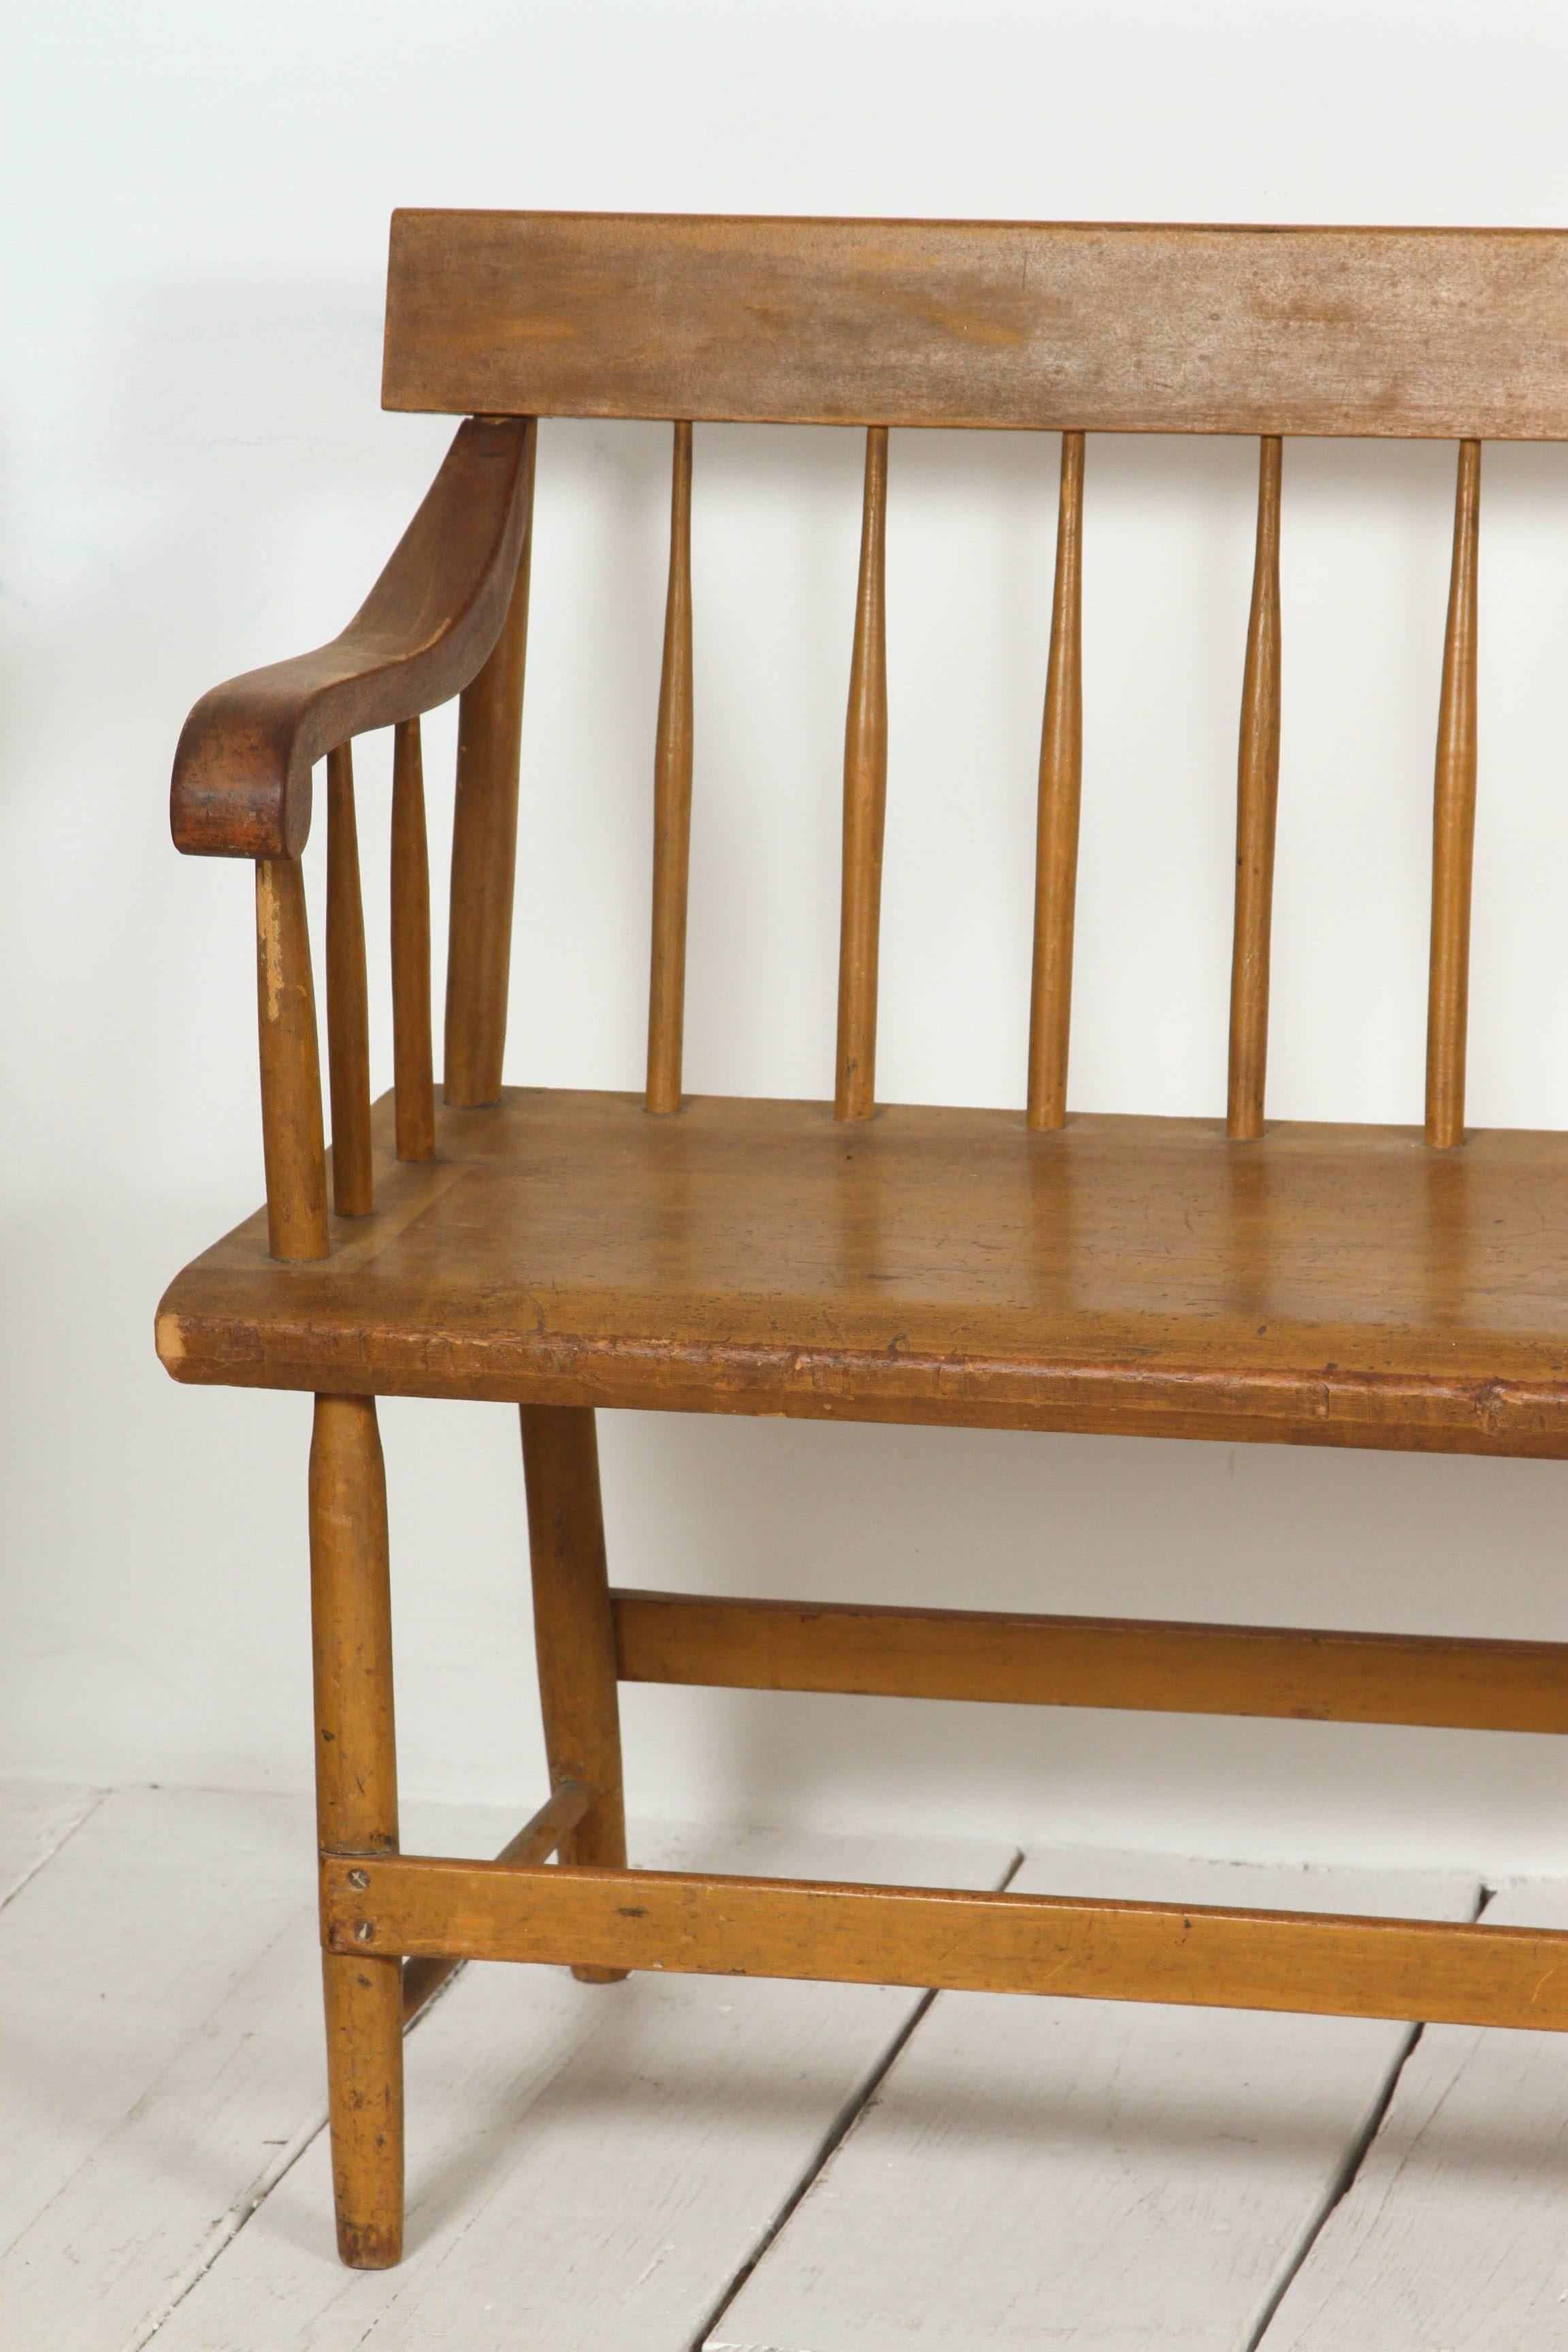 Classic eight long farm style deacon bench. Great for large entryway or with large farm style table.